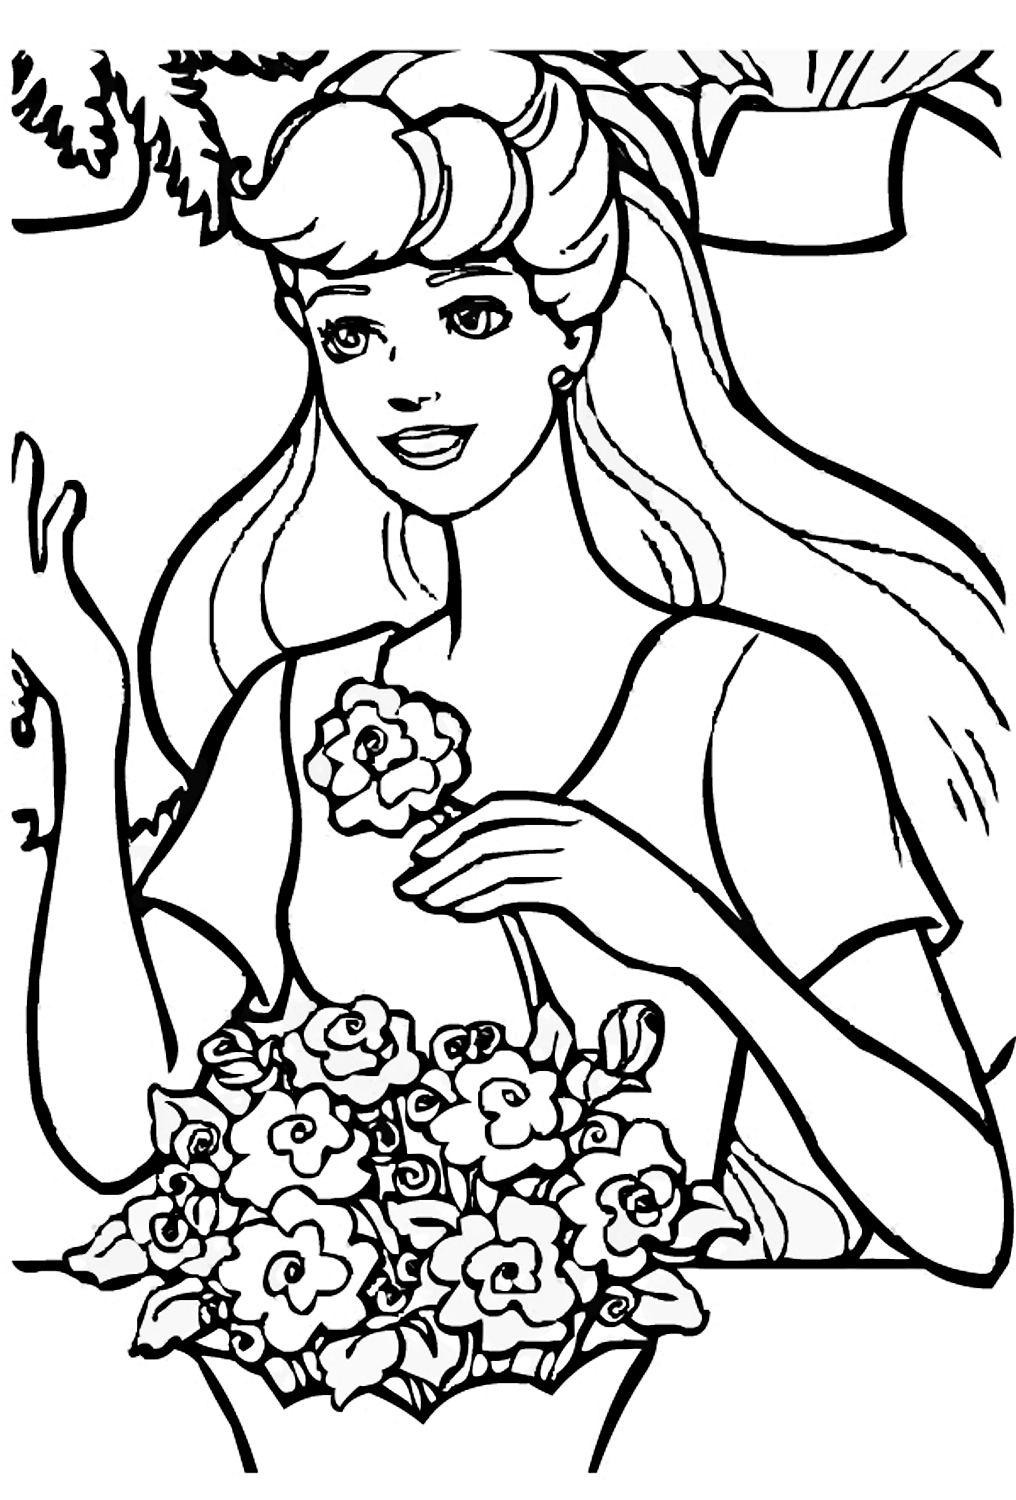 Barbie 01 Barbie coloring page to print and coloring